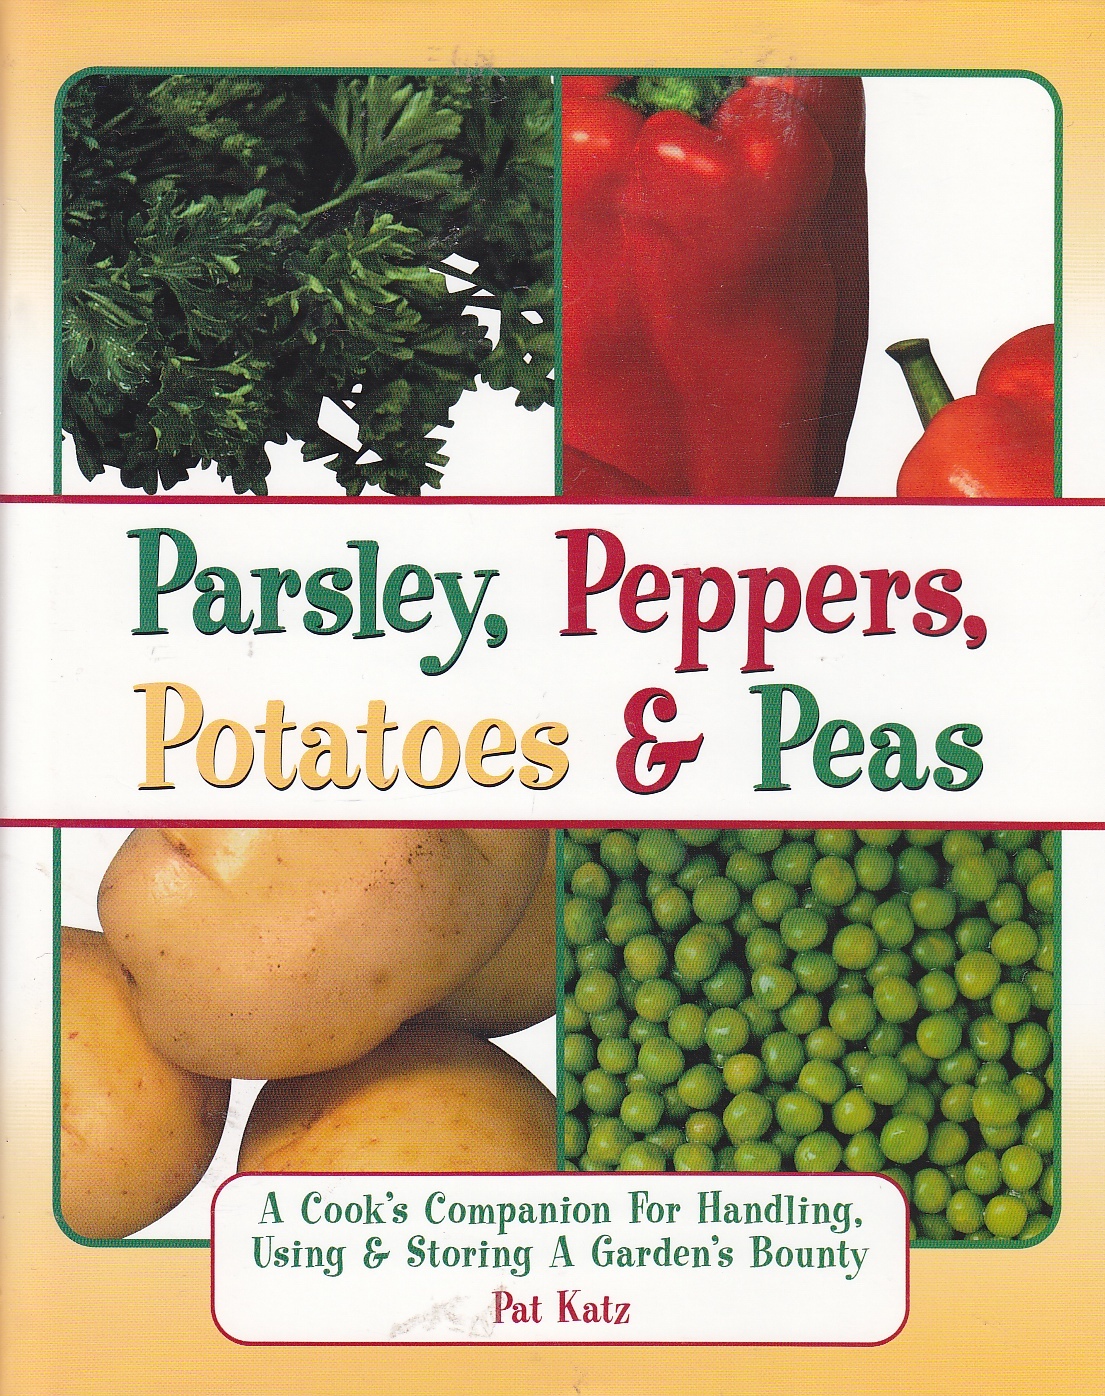 Image for Parsley, Peppers, Potatoes & Peas A Cook's Compainon for Handling, Using & Storing a Garden's Bounty